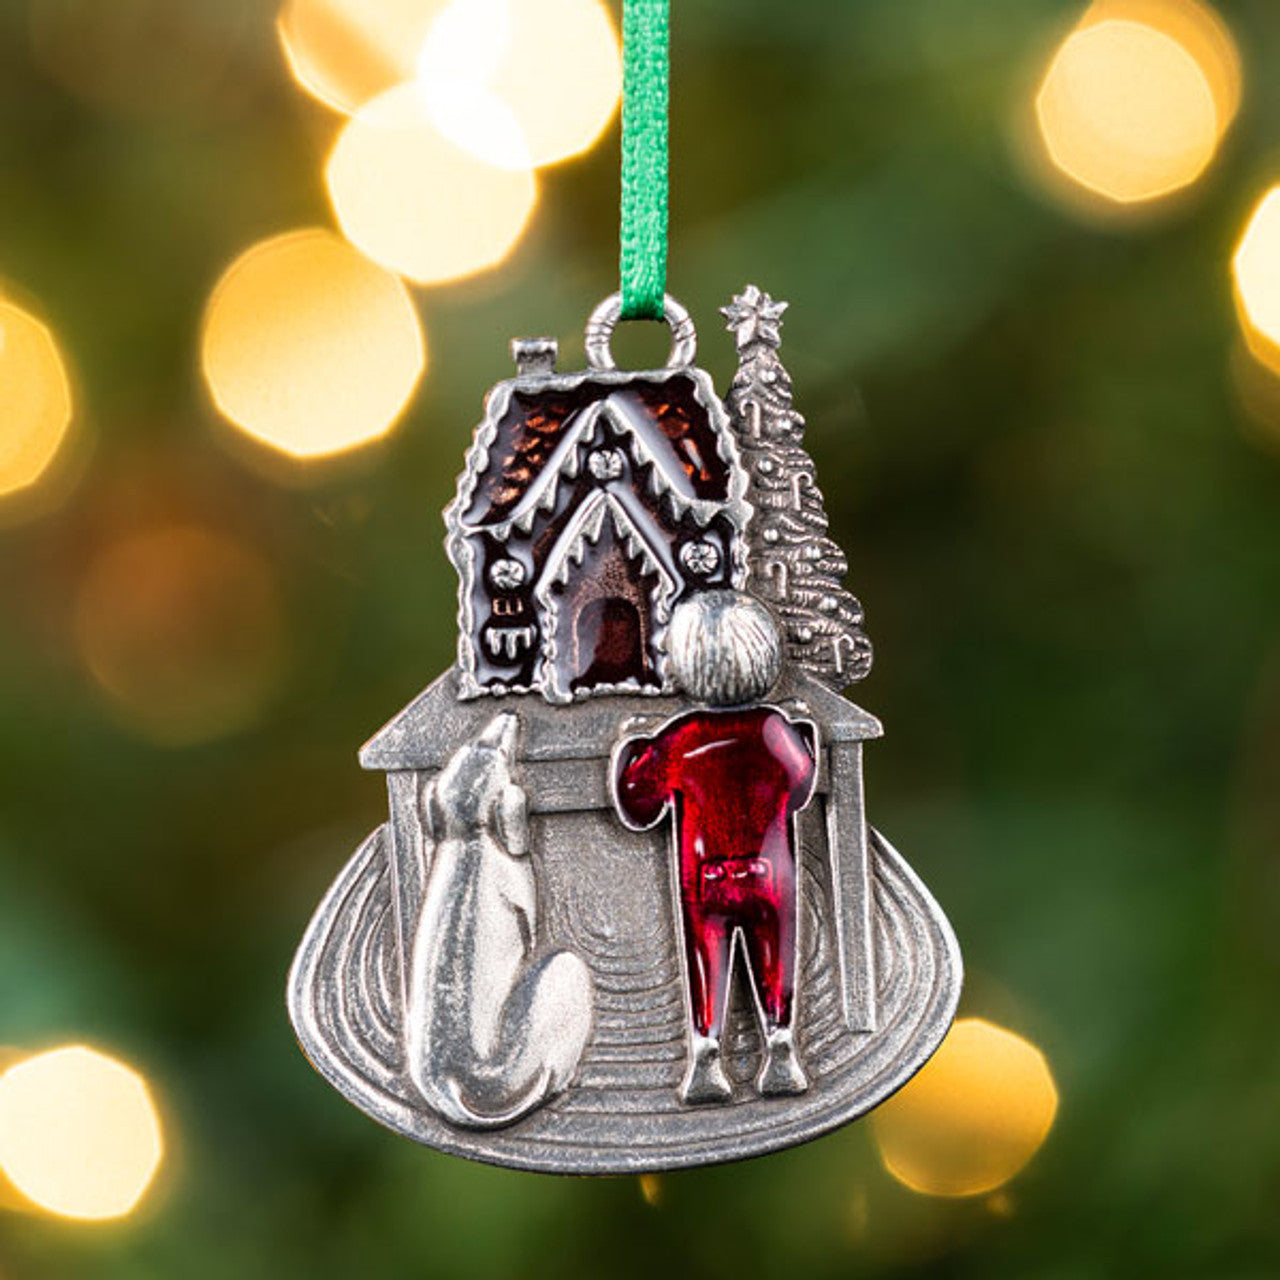 Danforth Pewter Christmas Ornament Dog and Boy making gingerbread house. Ornament hanging on christmas tree.